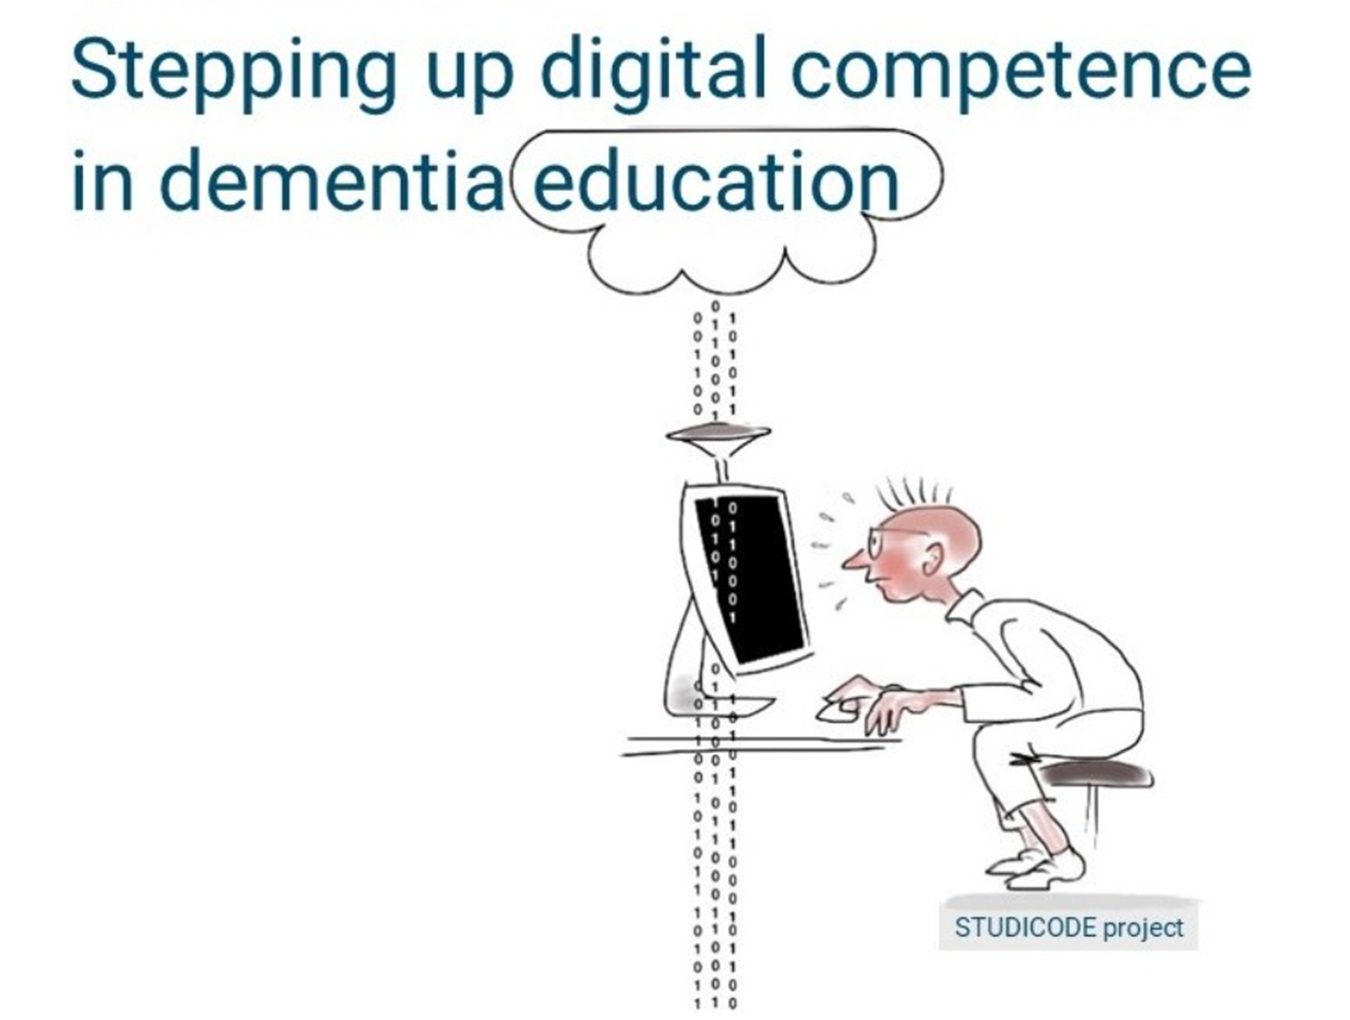 STUDICODE: Stepping up digital competence in dementia education